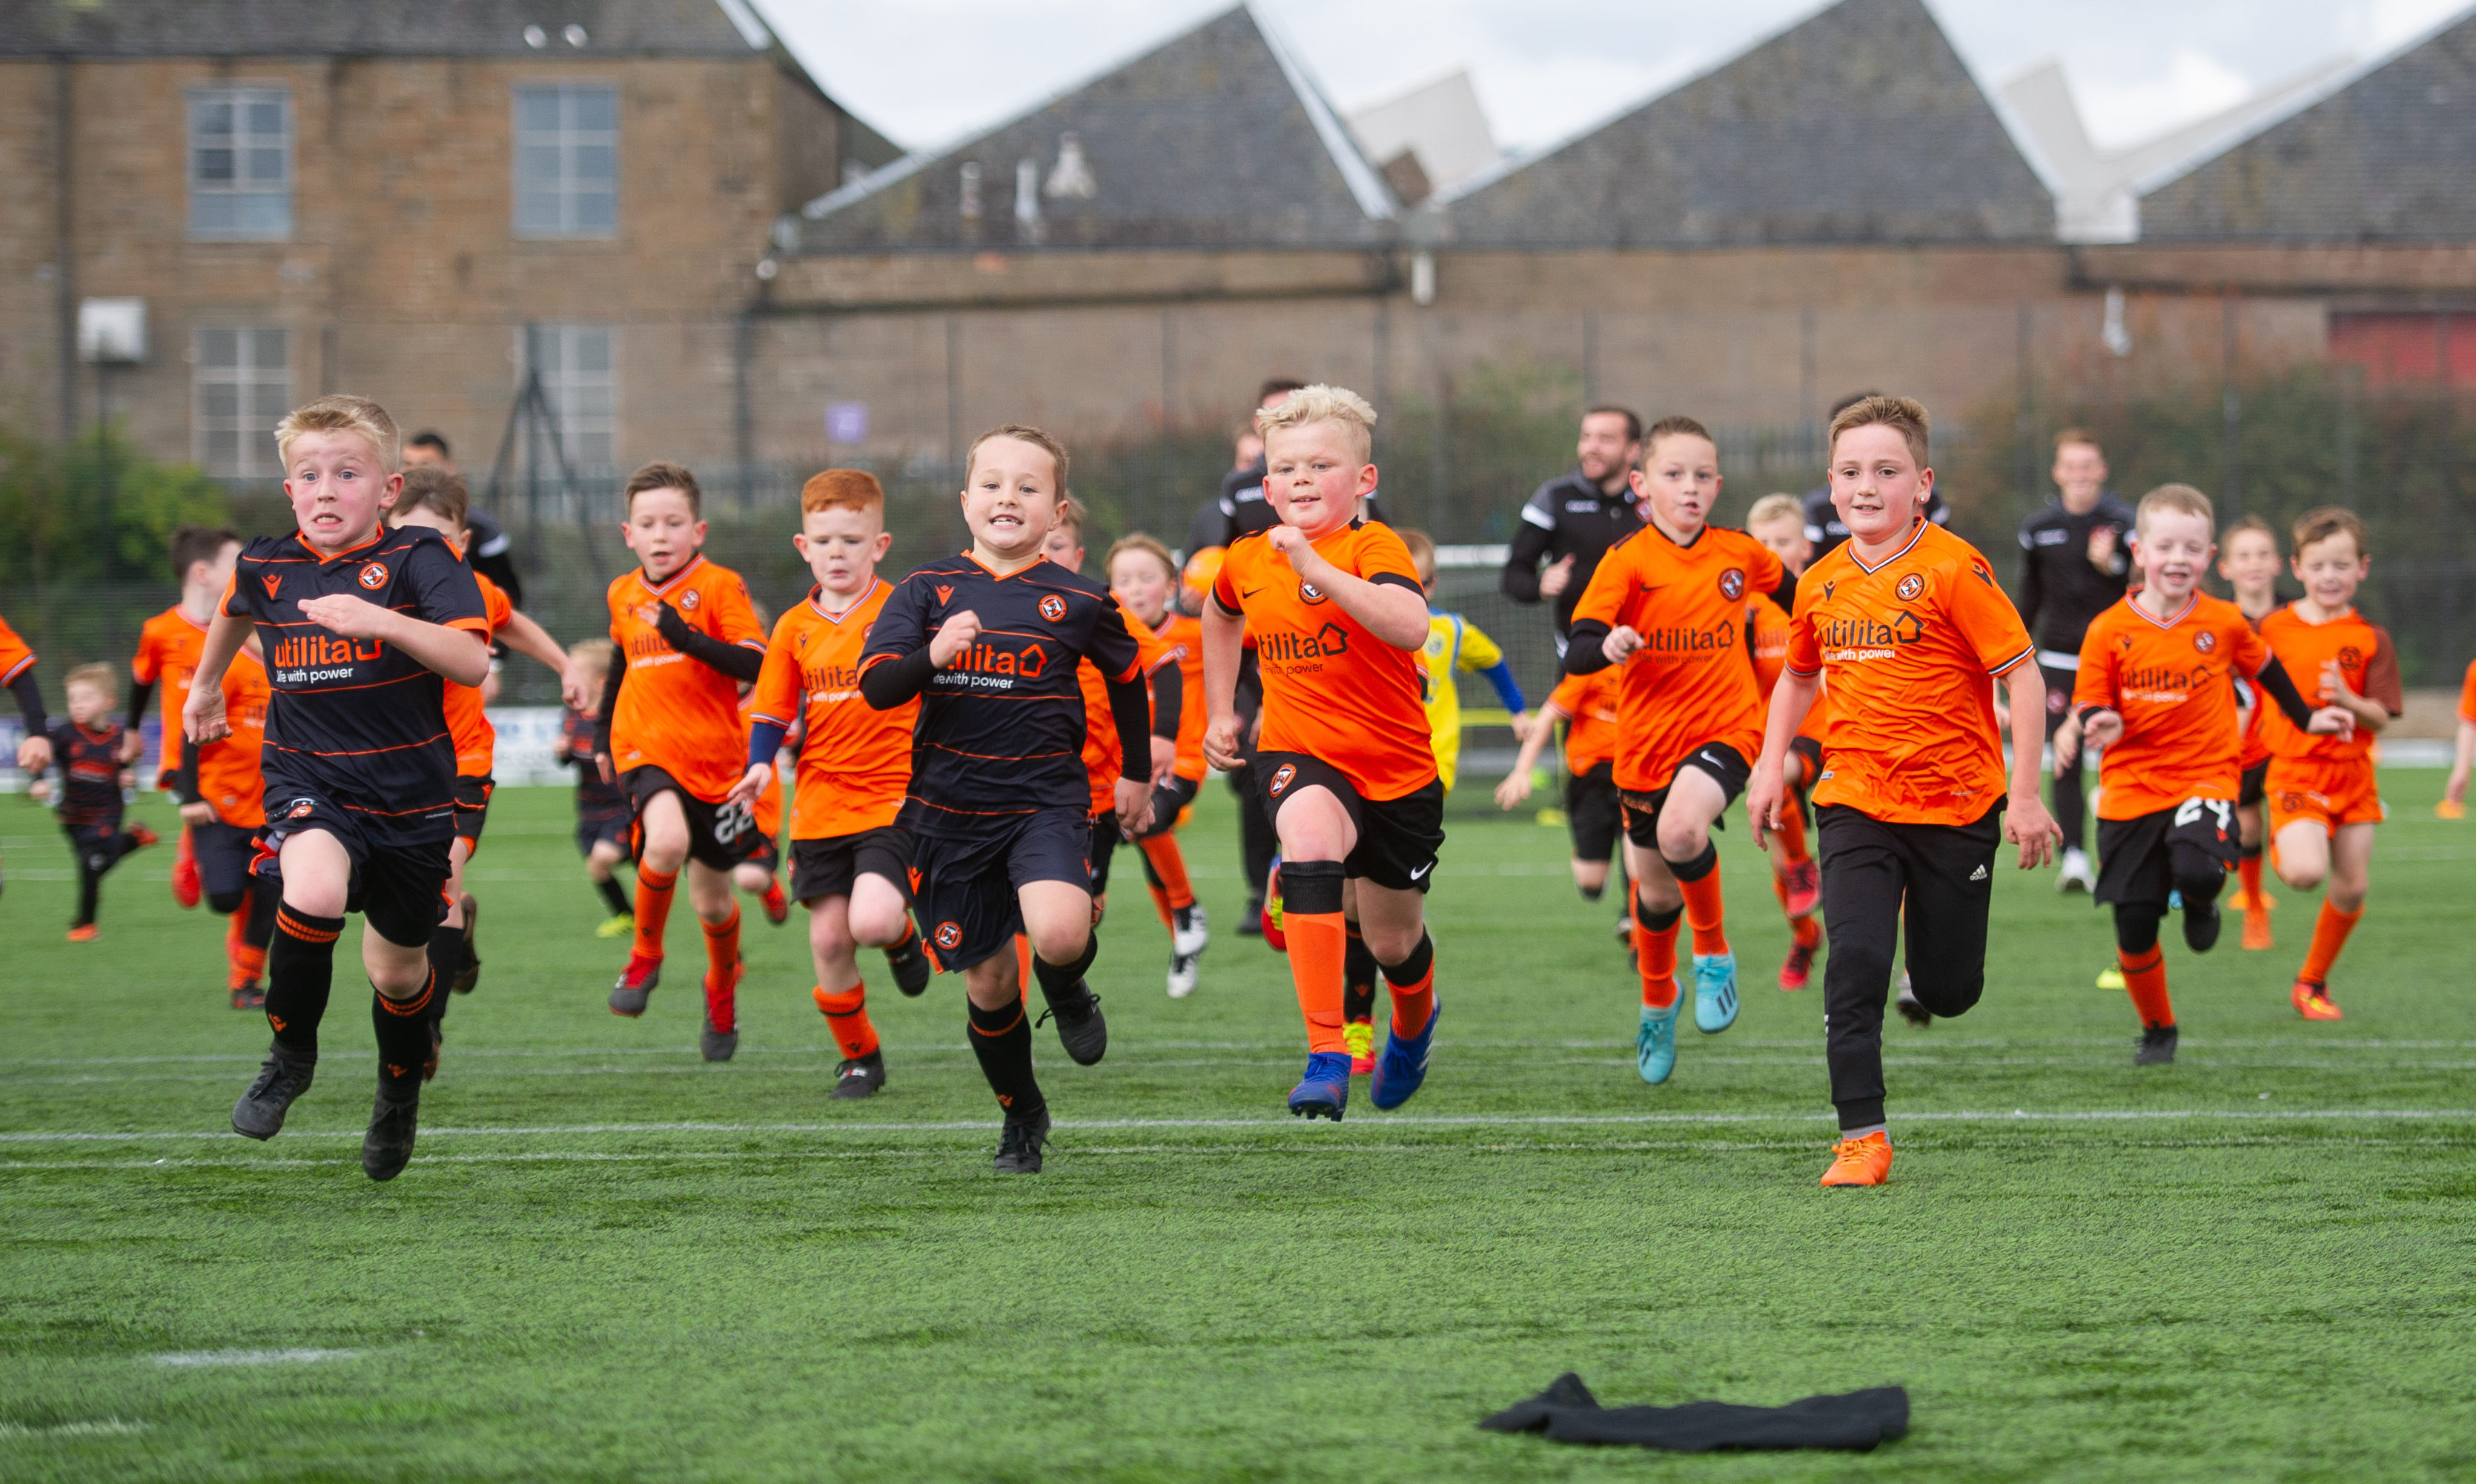 Dundee United players and the children enjoy a run together.